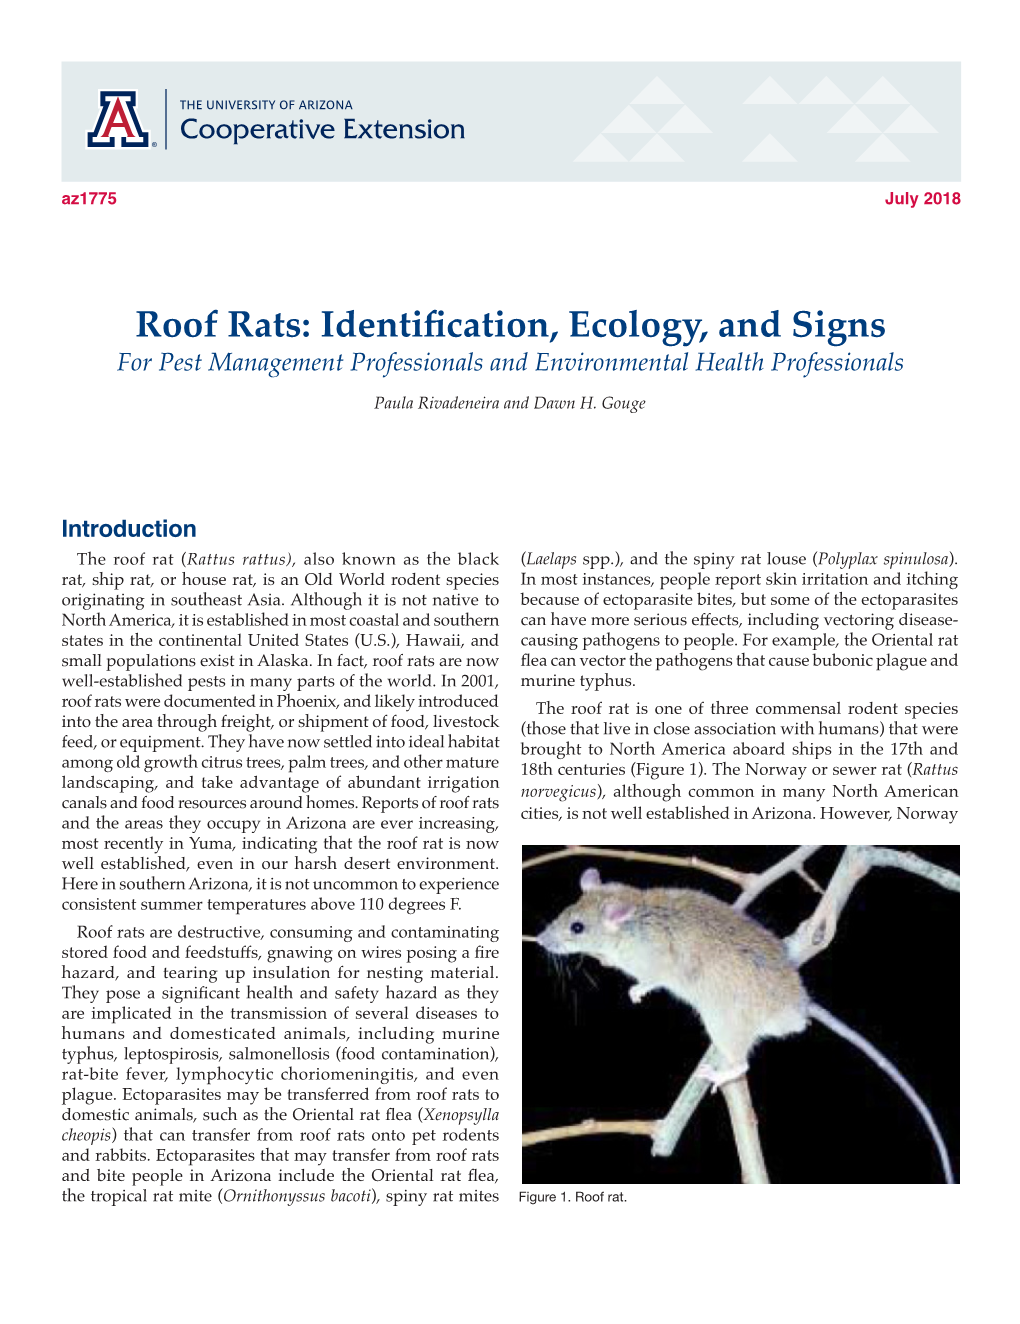 Roof Rats: Identification, Ecology, and Signs for Pest Management Professionals and Environmental Health Professionals